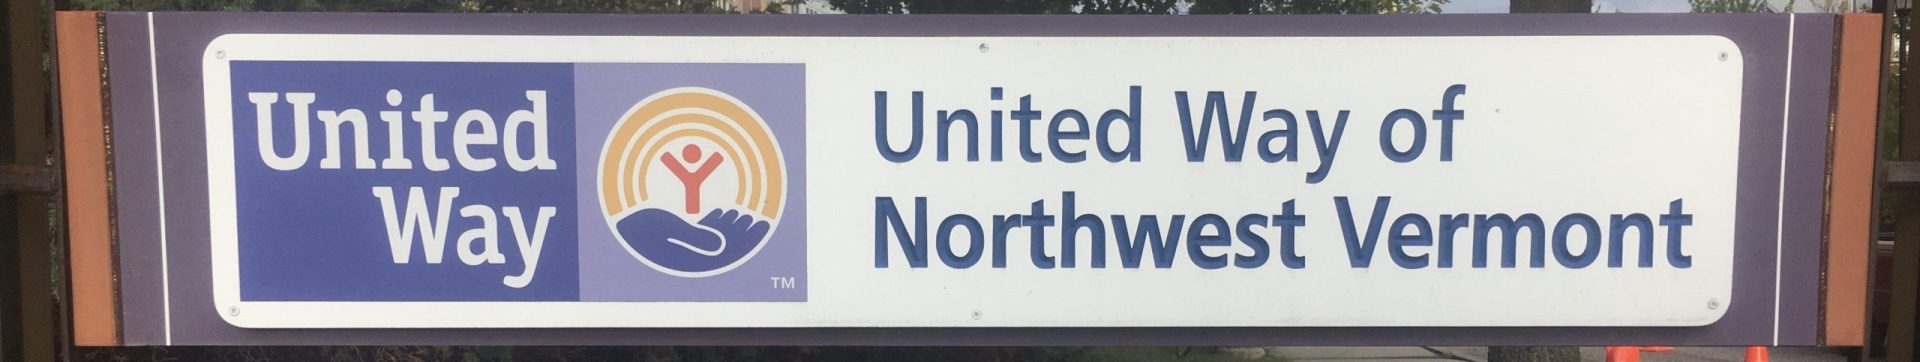 United Way of Northwest Vermont Mental Health Initiative Gets Going